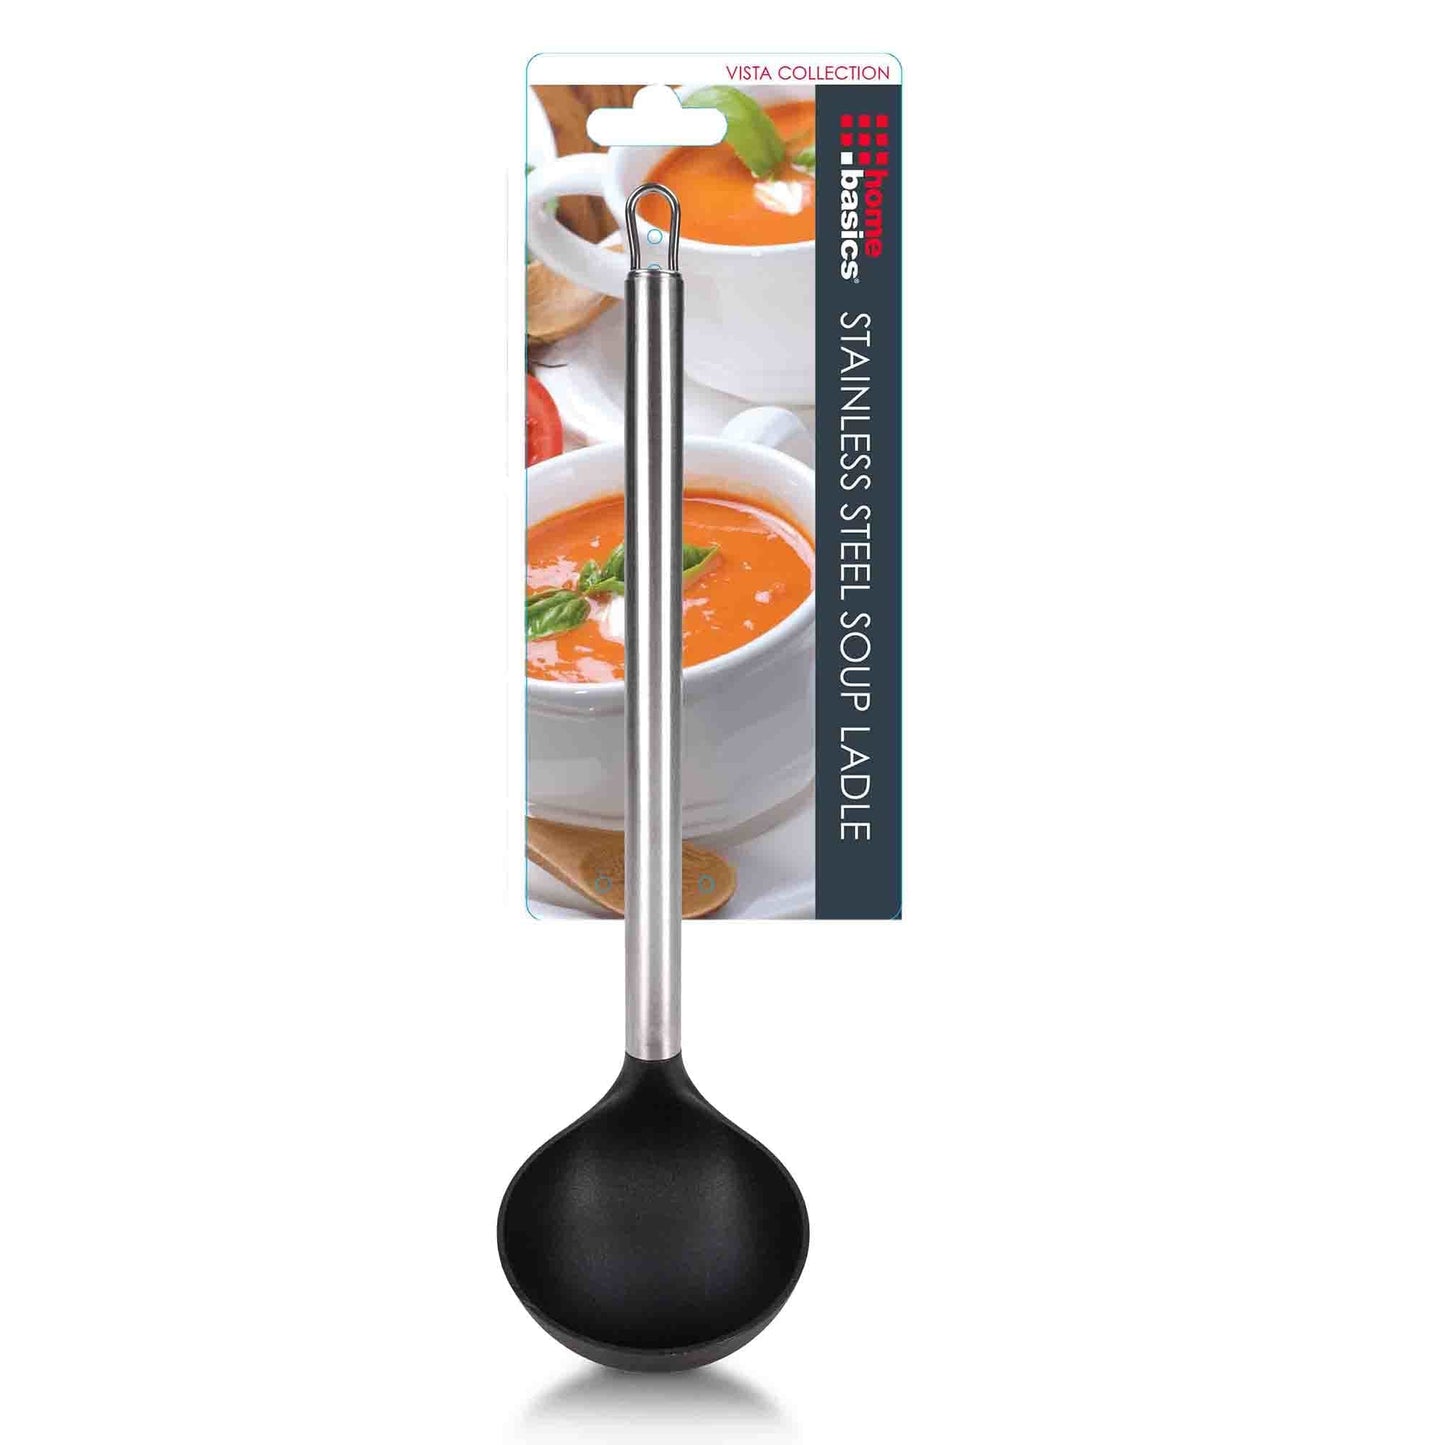 Vista Collection Stainless Steel Soup Ladle